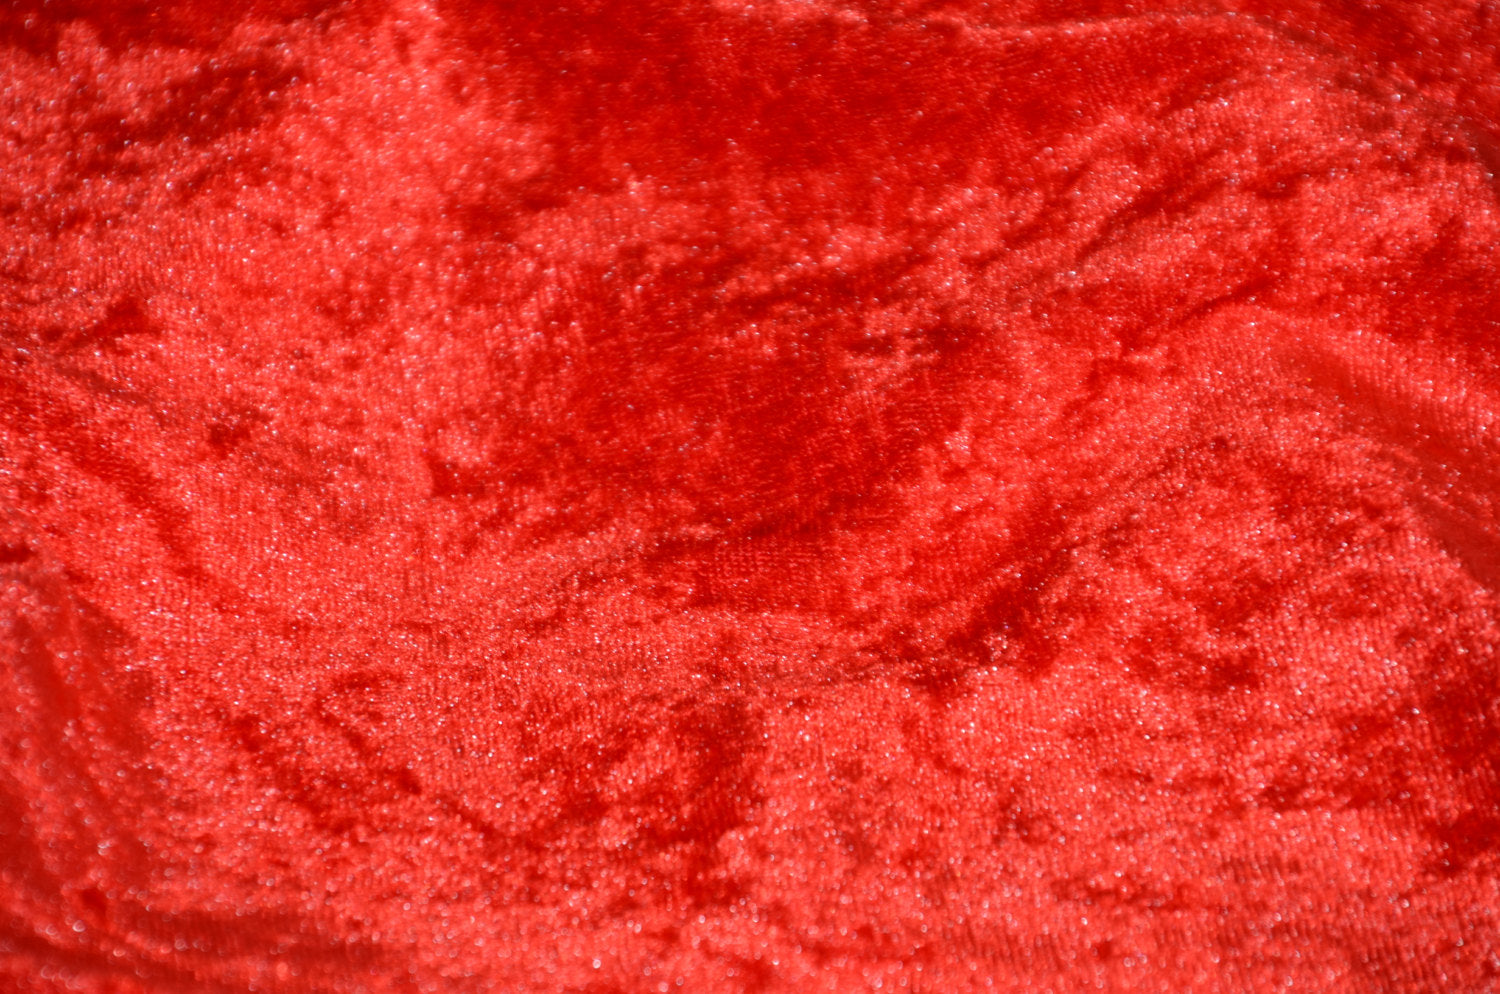 Red Panne Velvet Crush 2-WAY Stretch 60” Wide || Fabric by the Yard